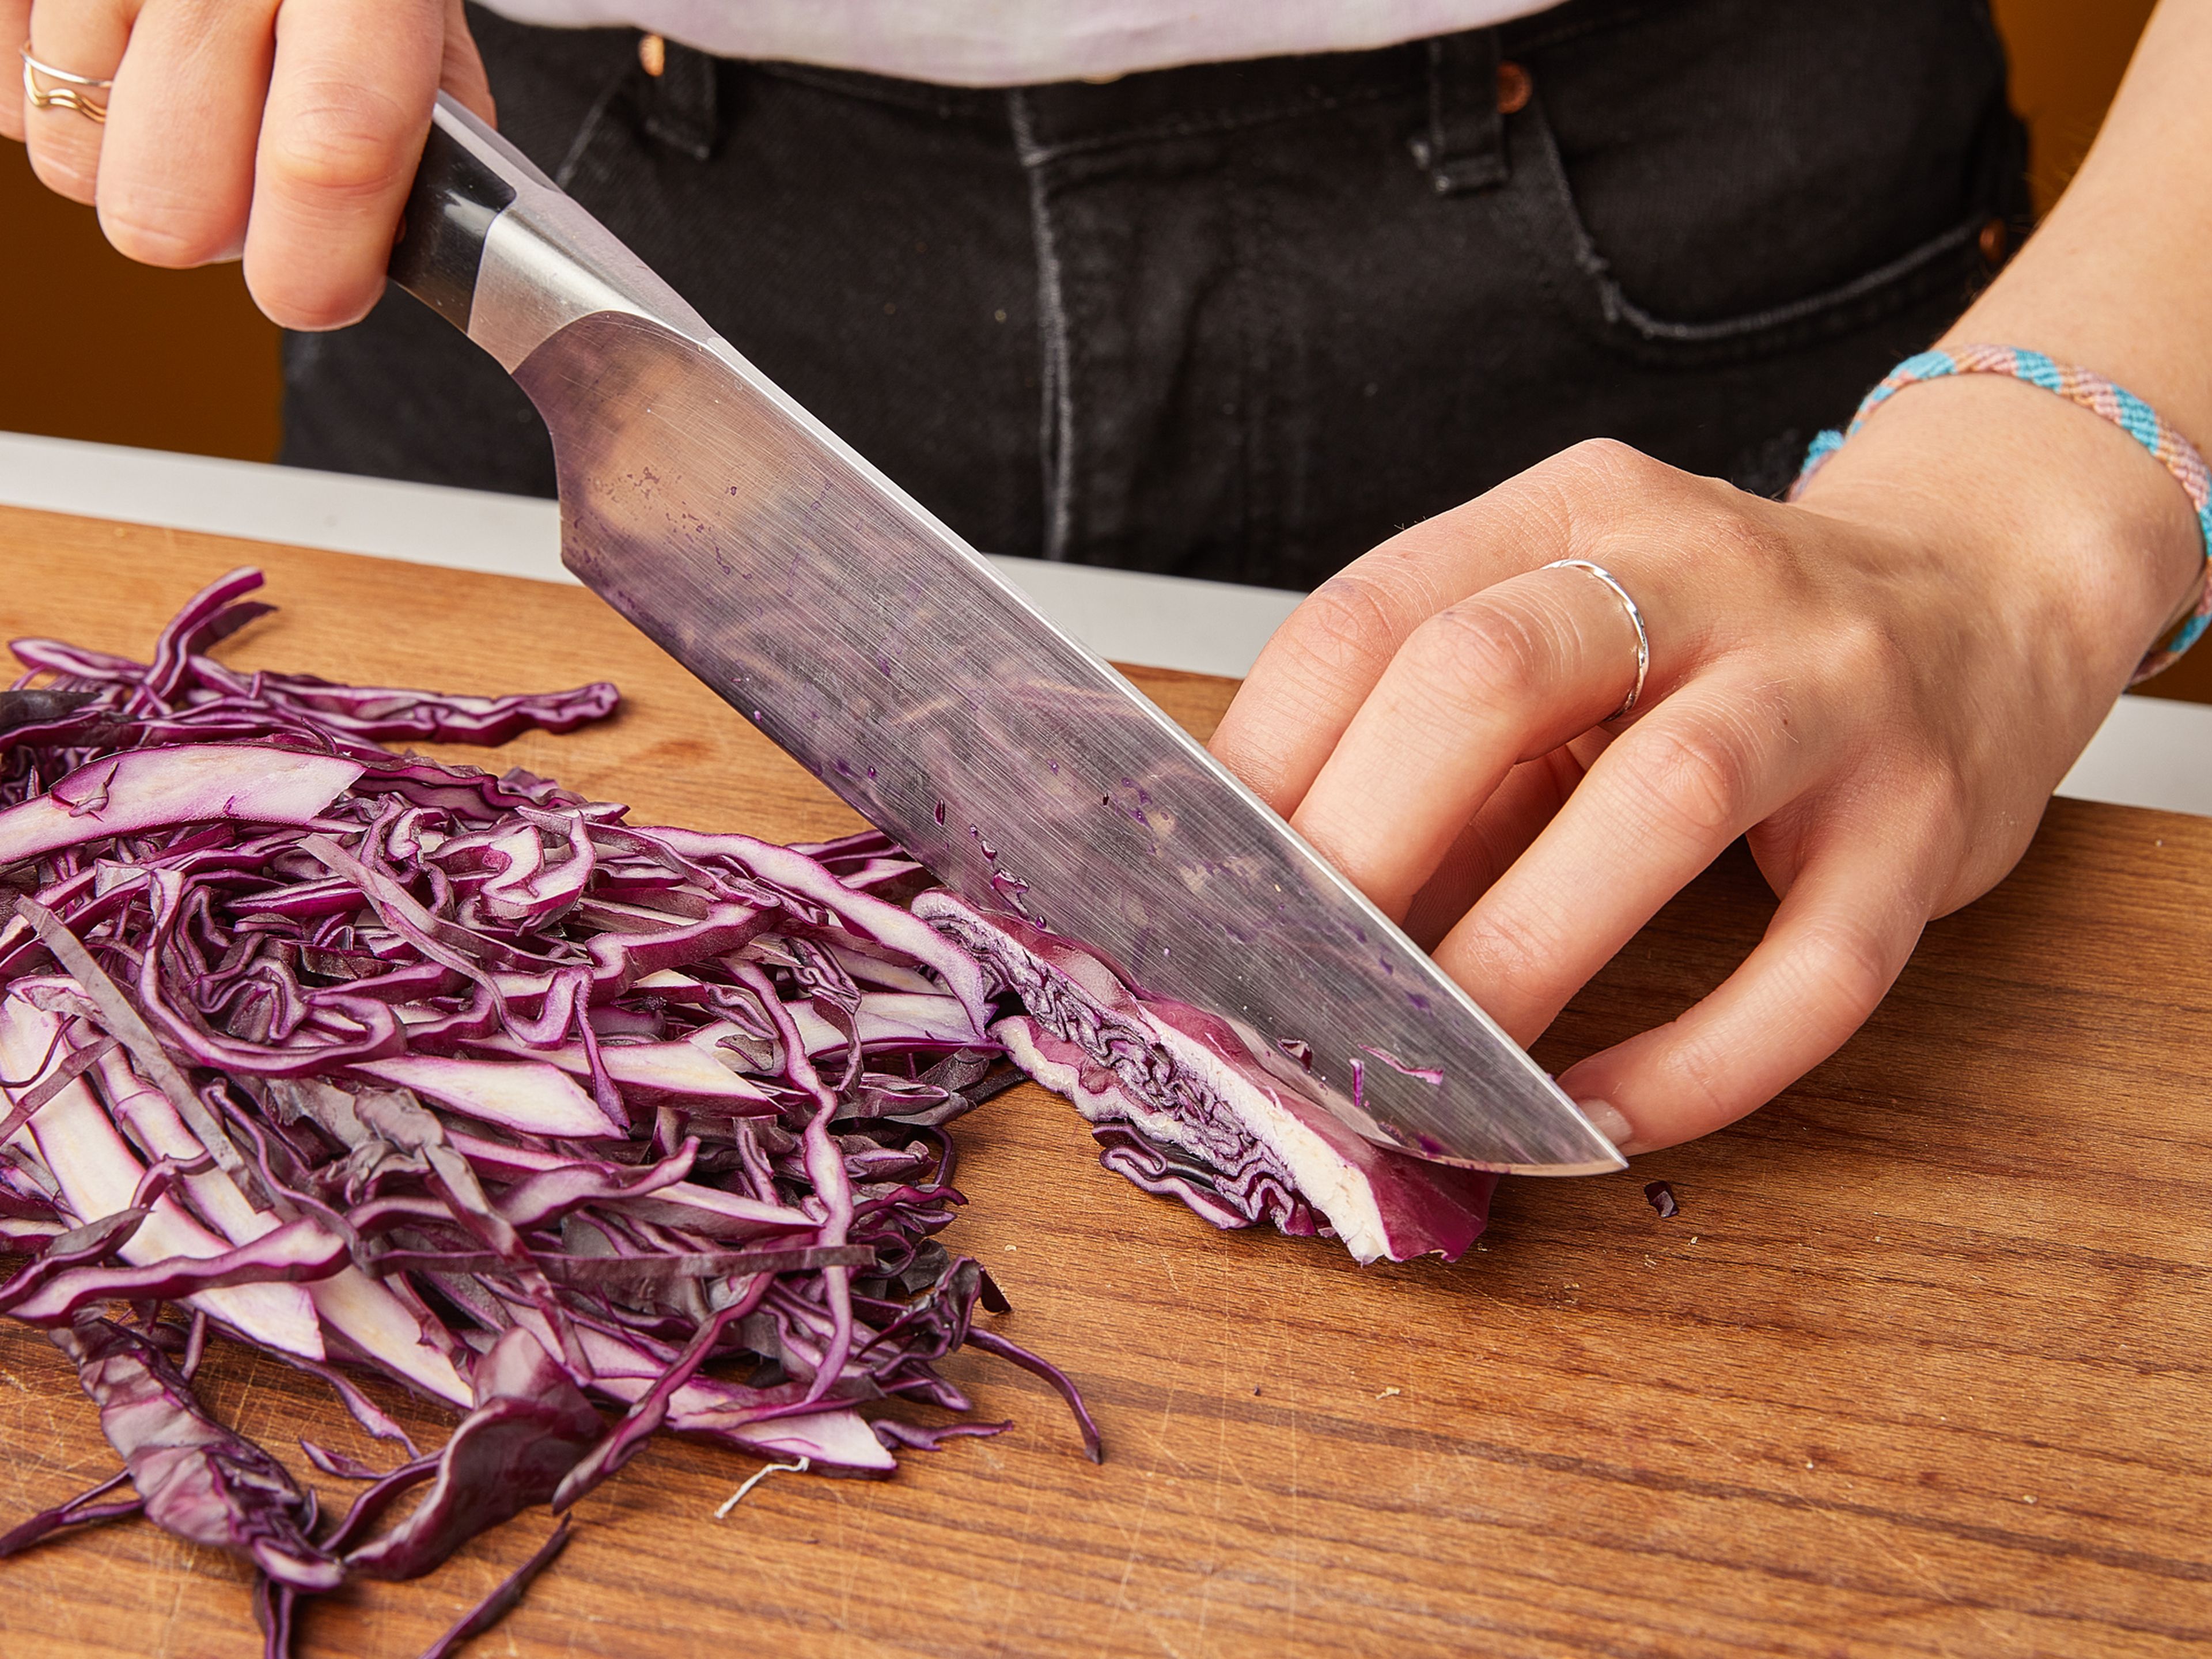 In the meantime, make the coleslaw: slice the red cabbage and carrots into thin strips. Slice the scallions into fine rings. In a large bowl, first mix the red cabbage with sesame oil, half of the mayonnaise, and white balsamic vinegar. Toss with your hands for about 1 min. until the cabbage gets softer. Then add the carrots and scallions, mix, and season with salt, pepper, and a little lime juice.